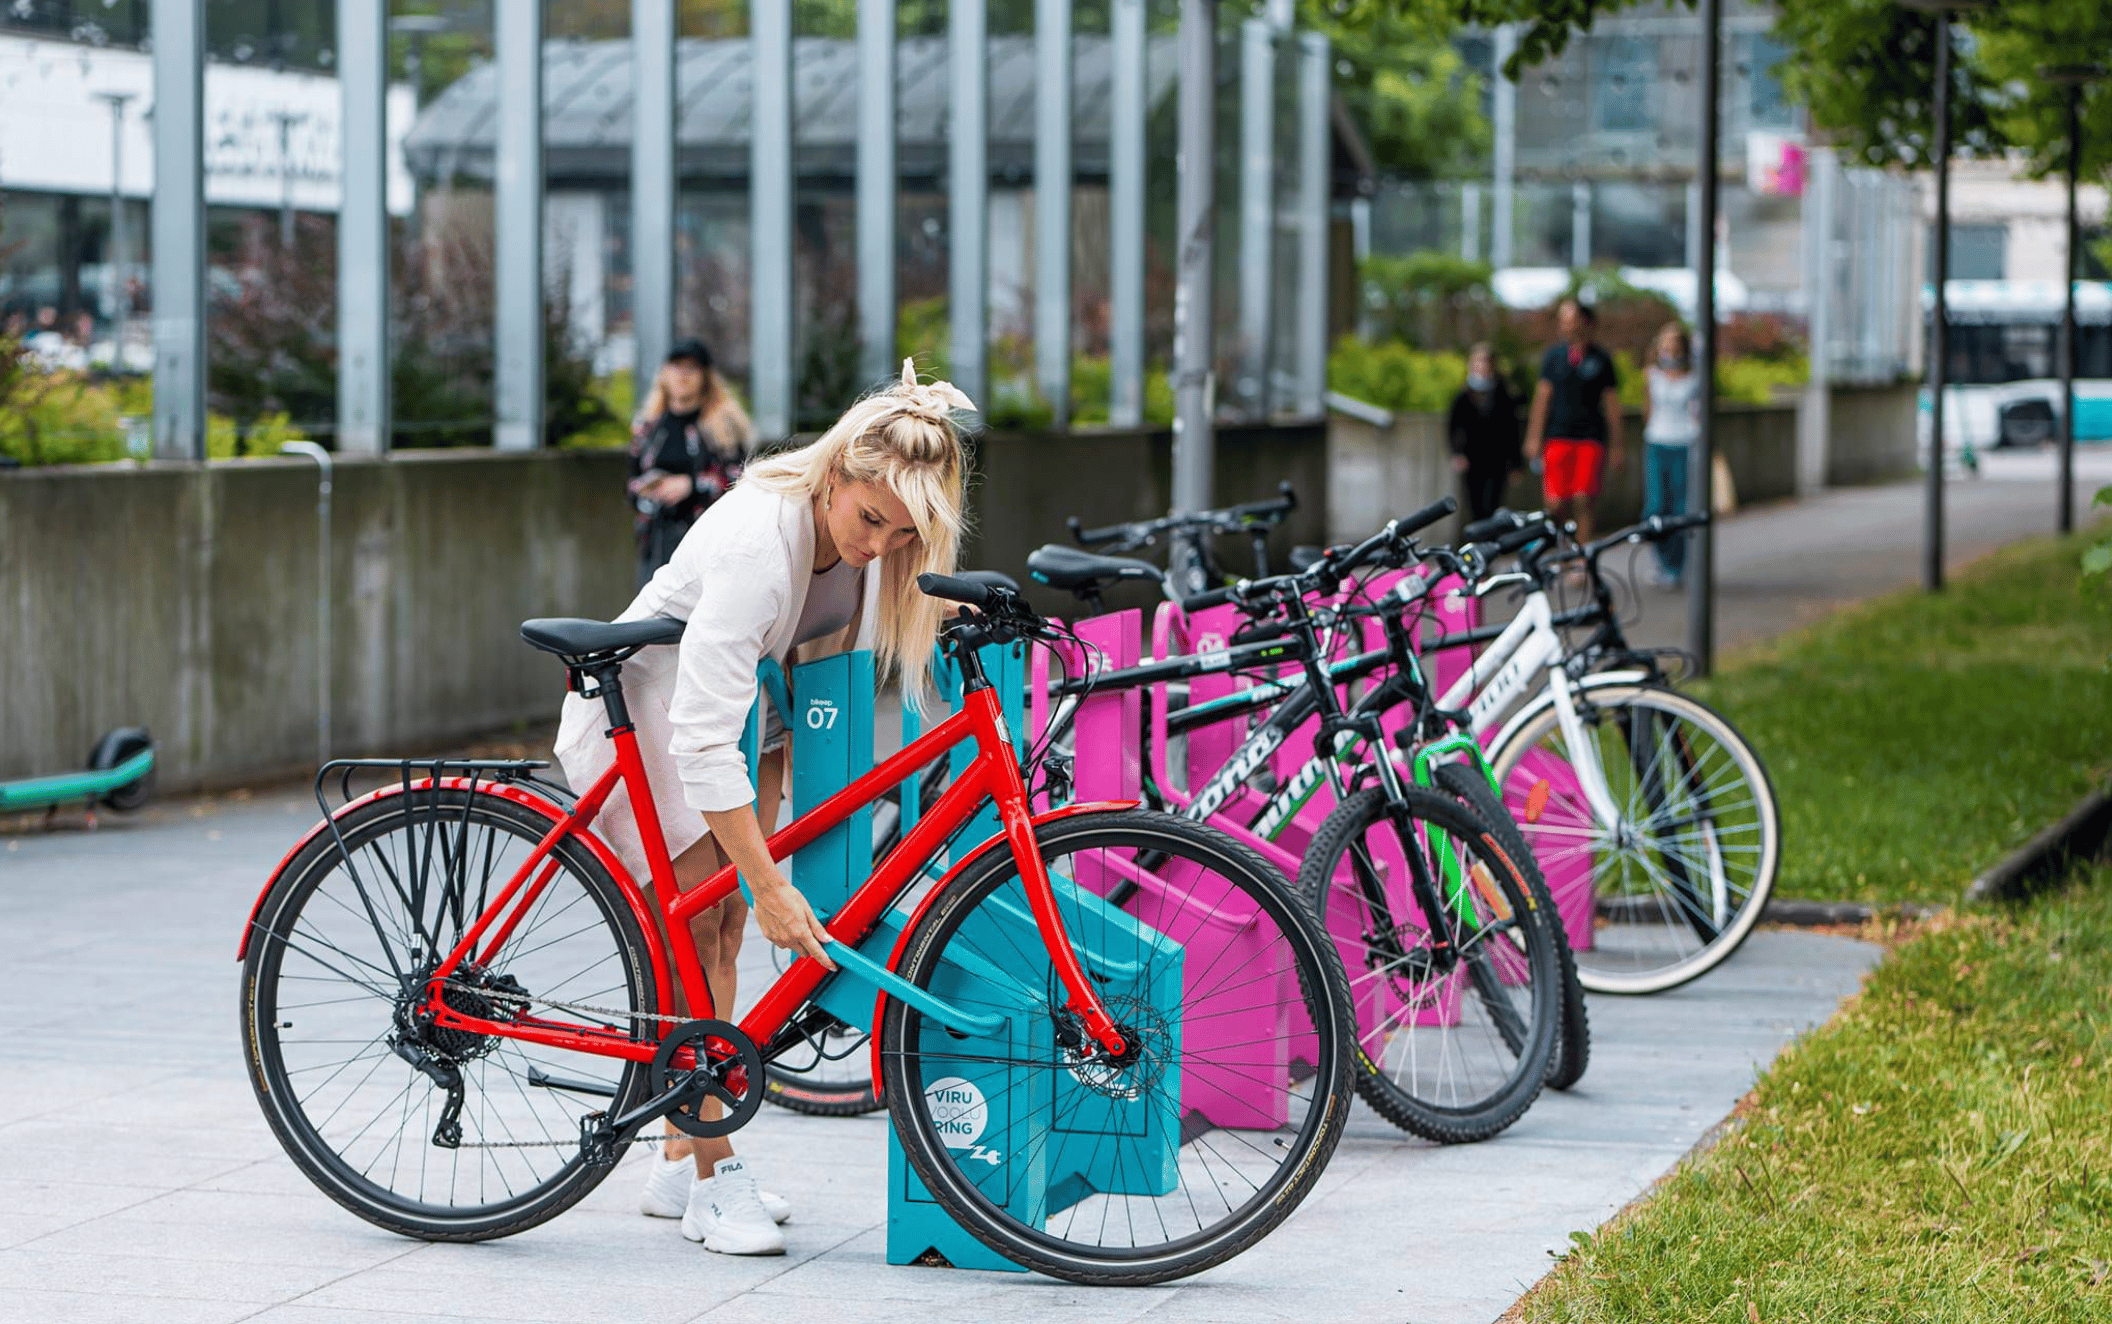 The first Bikeep smart bike station in Latvia will be installed at the “Galerija Centrs” T/C